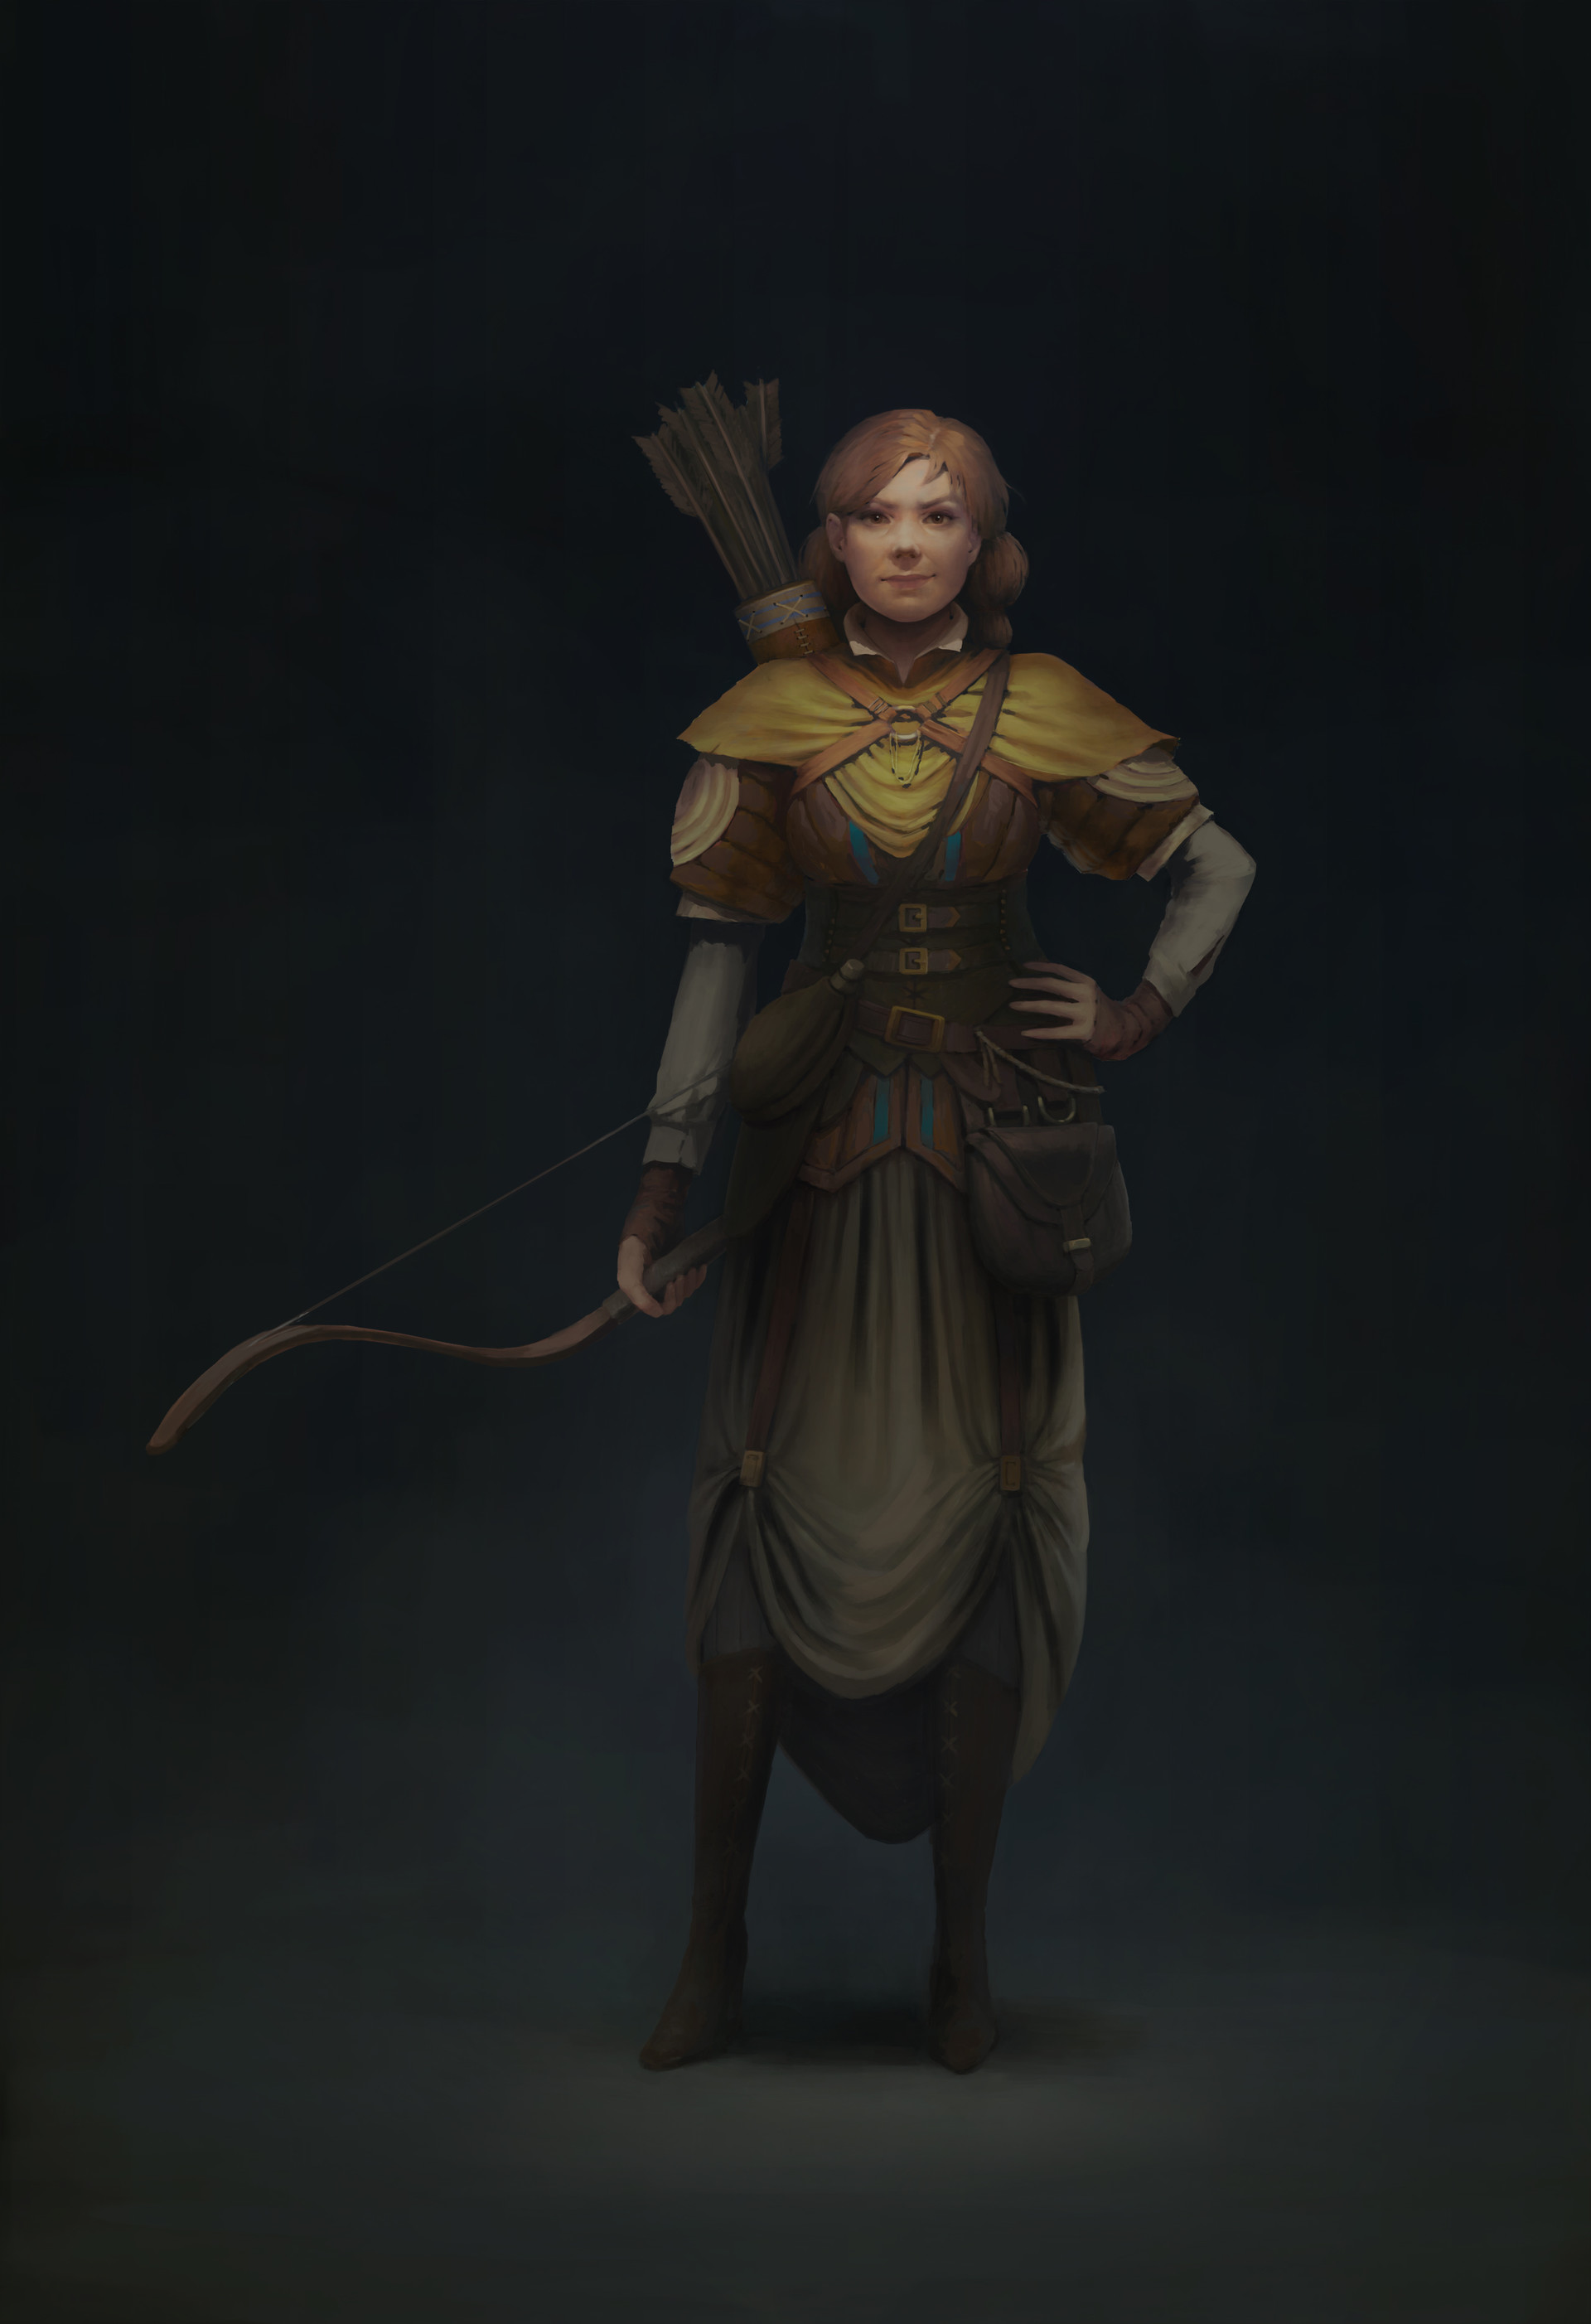 ArtStation - female character concepts